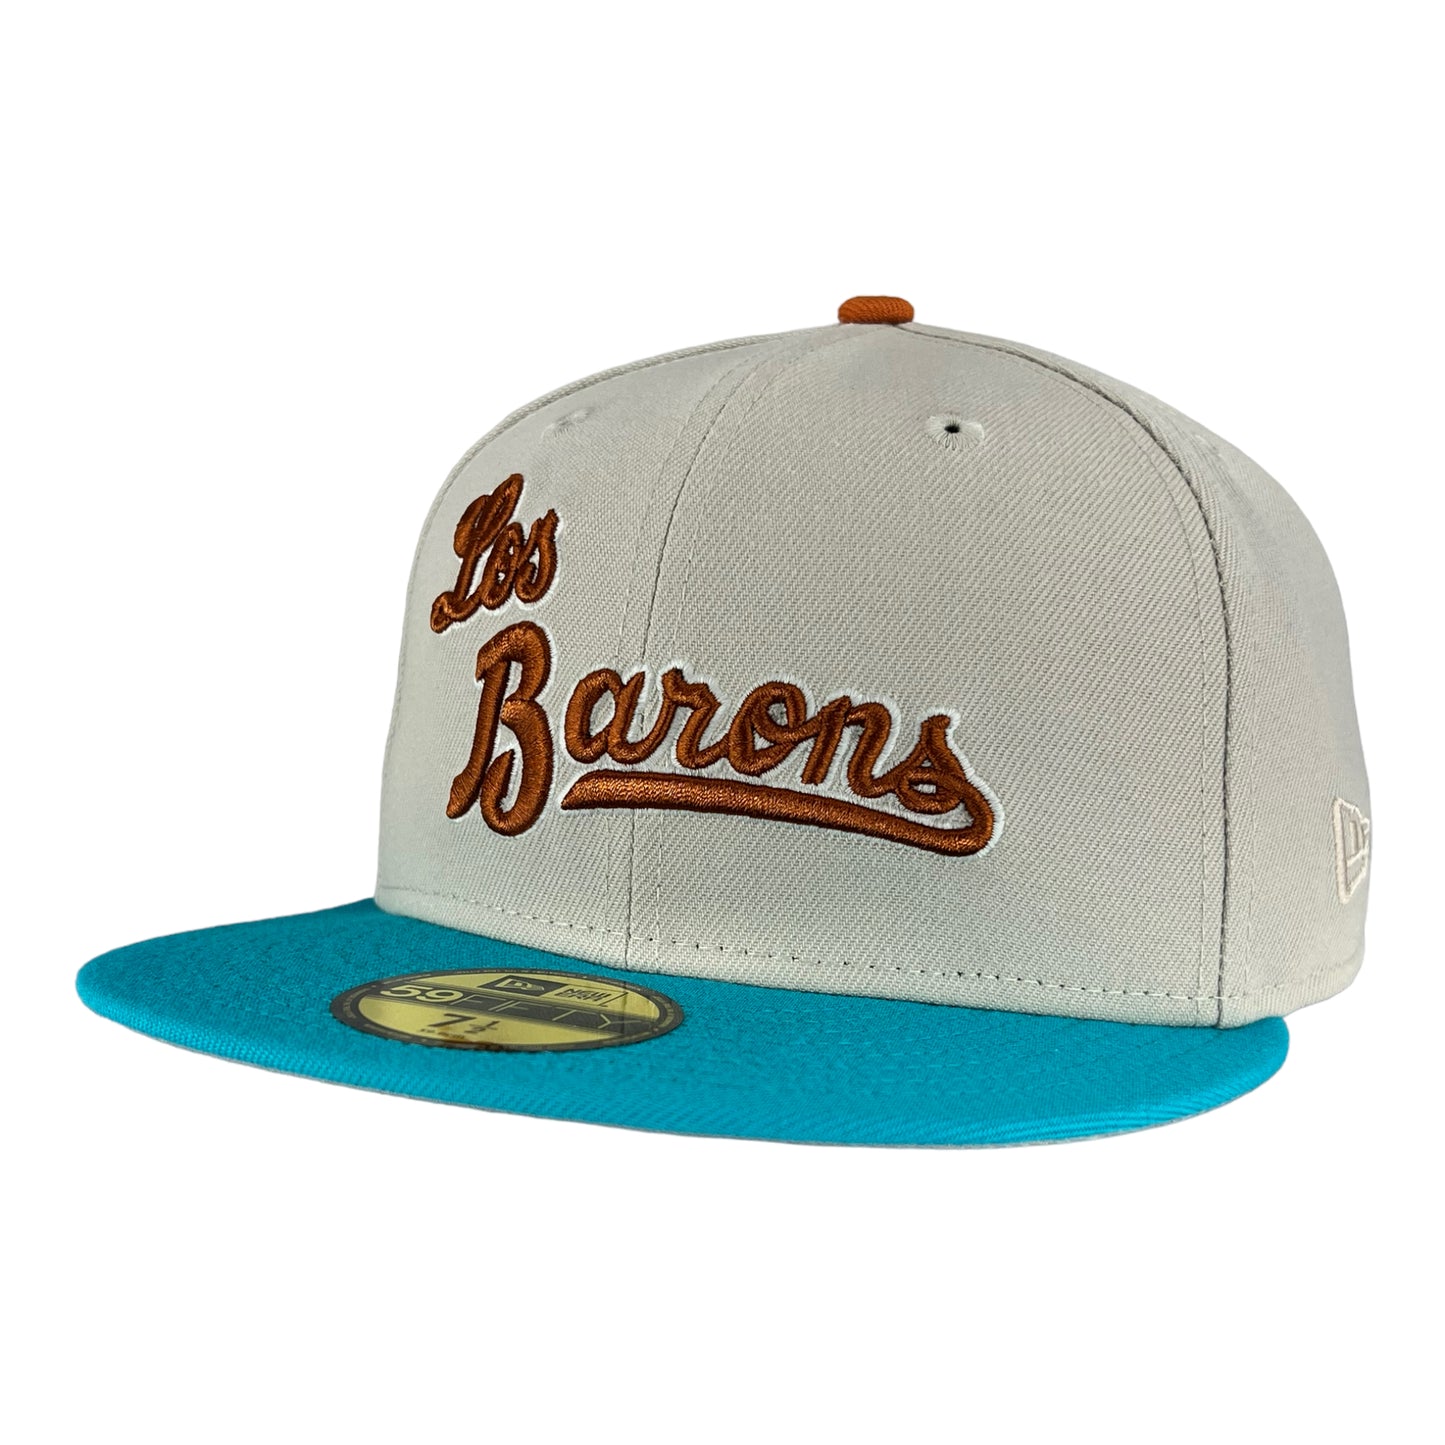 Birmingham Barons "Los Barons" Stone/Teal ASG '03 Sox New Era 59FIFTY Fitted Hat